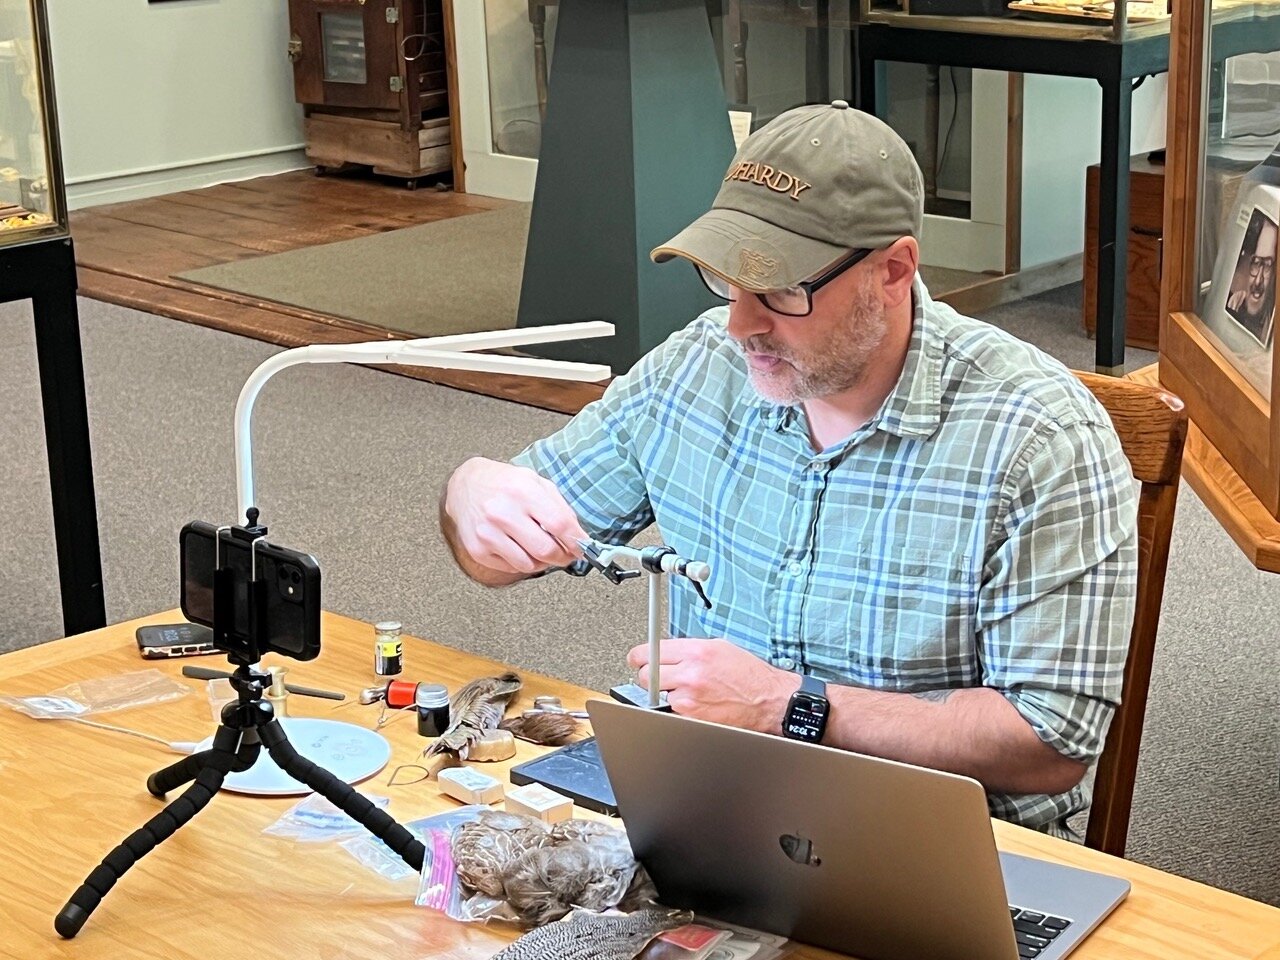 Seth Cavarretta demonstrated tying flies on his vise at the CFFC Museum last Saturday. The session was also live broadcasted via Zoom to members of the Catskill Fly Tyers Guild around the world.